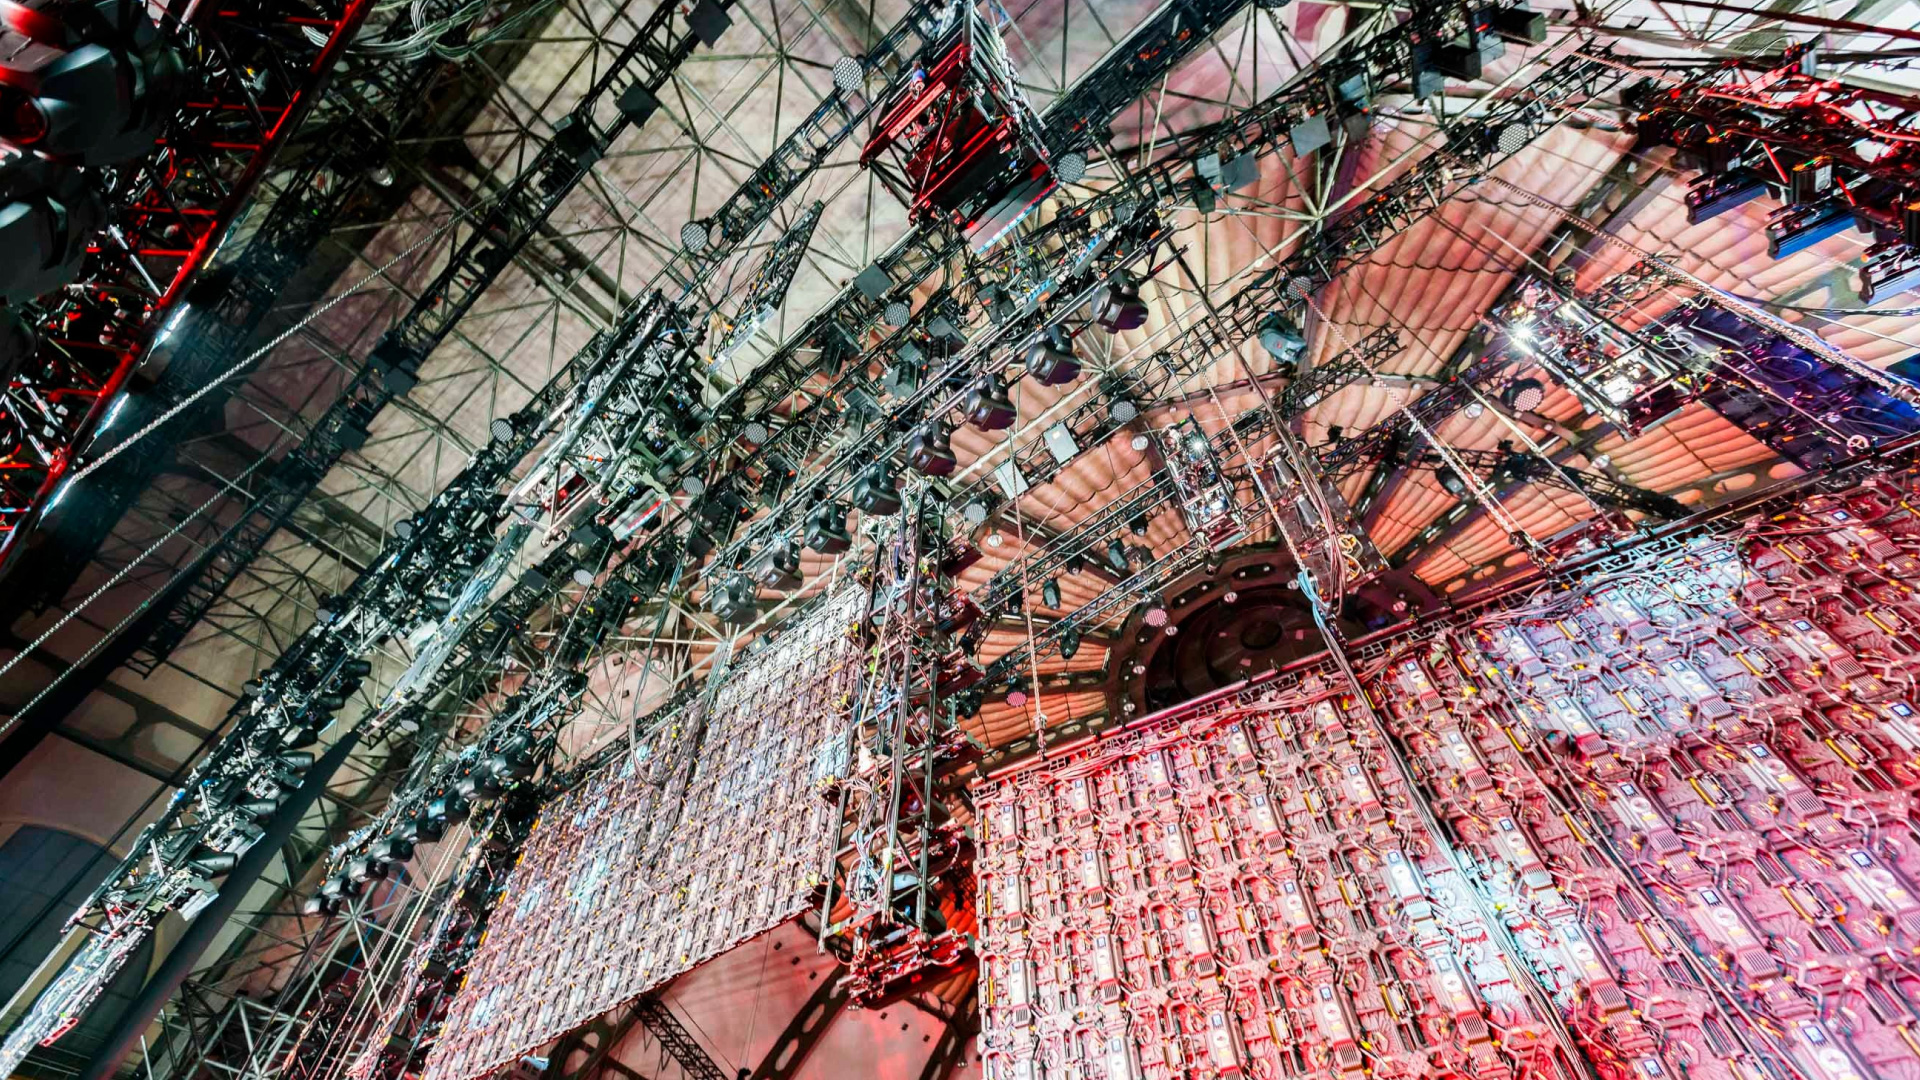 Rigging at Eurovision Song Contest 2018